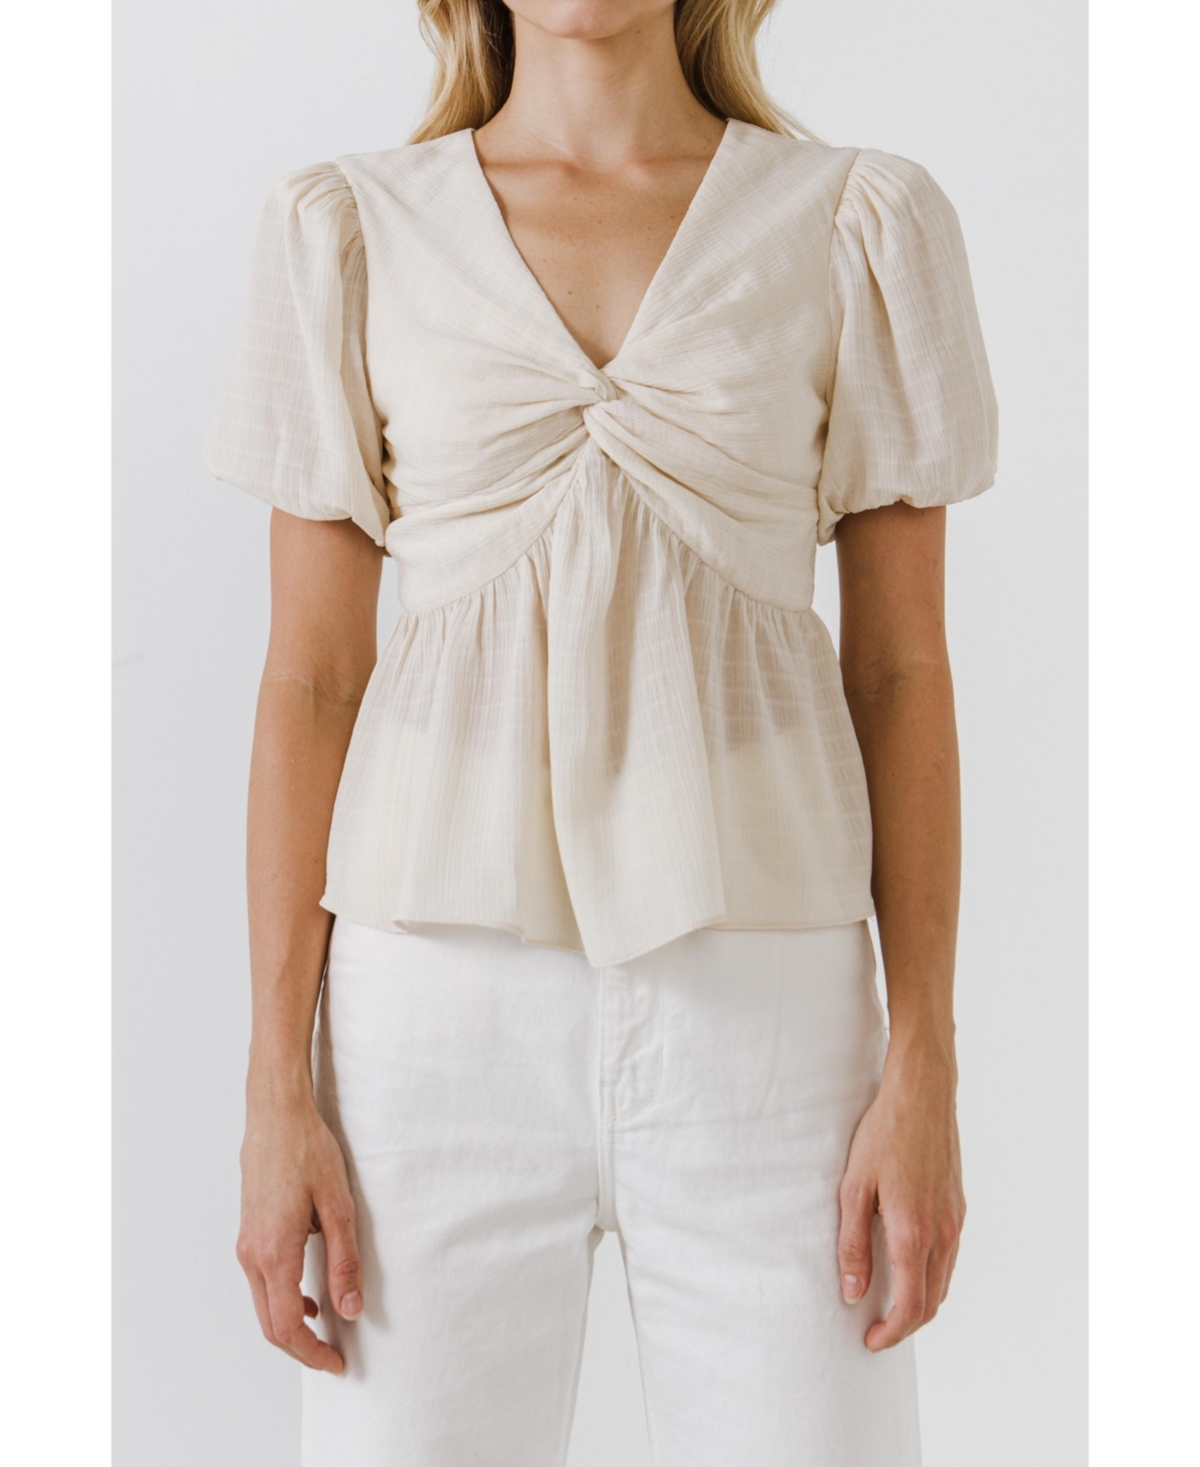 Women's Knotted Top - Cream